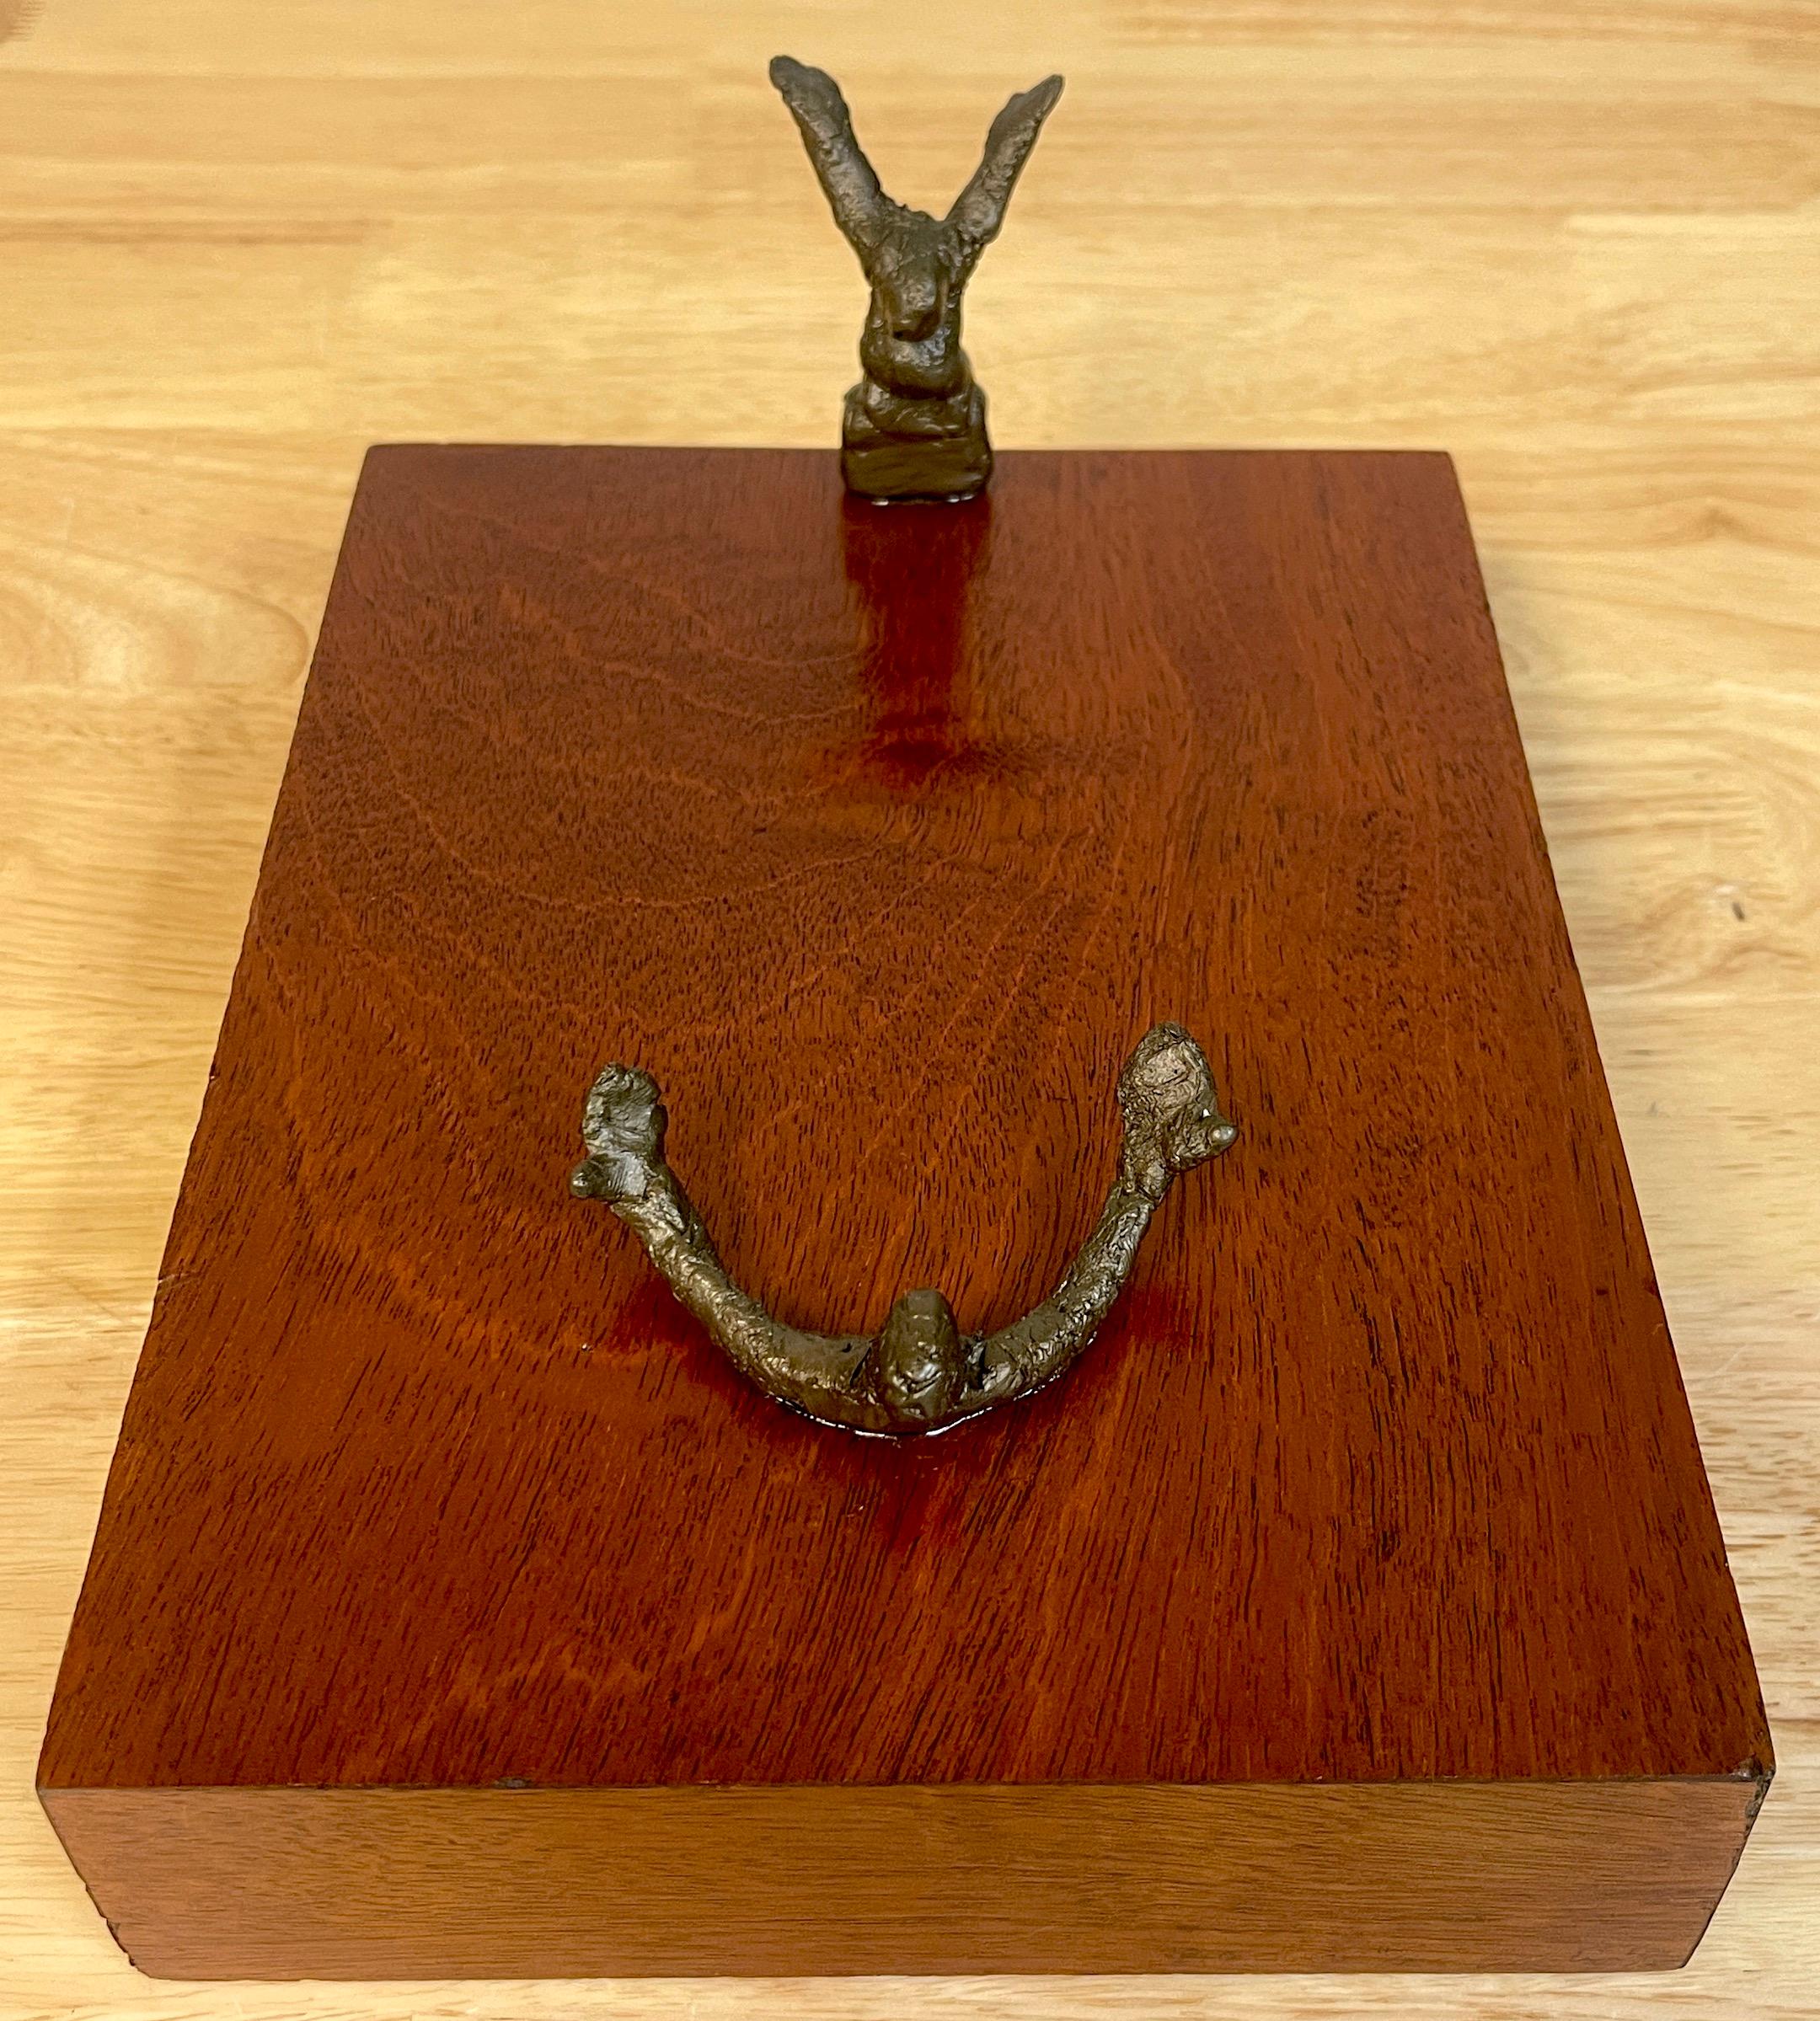 Brutalist Bronze Table Sculpture 'I'll Catch You', Unsigned In Good Condition For Sale In West Palm Beach, FL